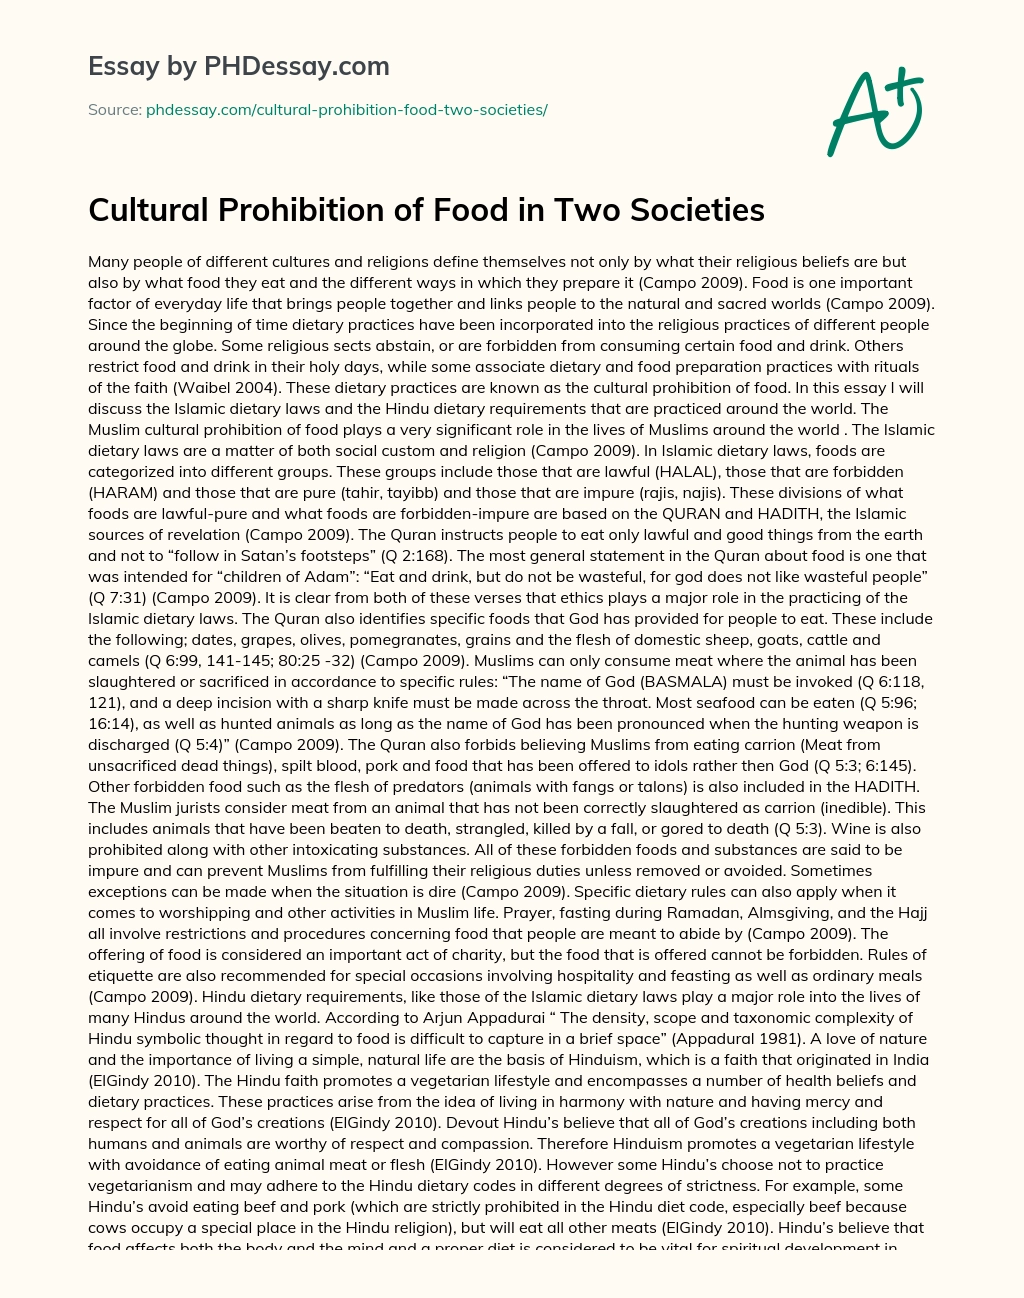 Cultural Prohibition of Food in Two Societies essay